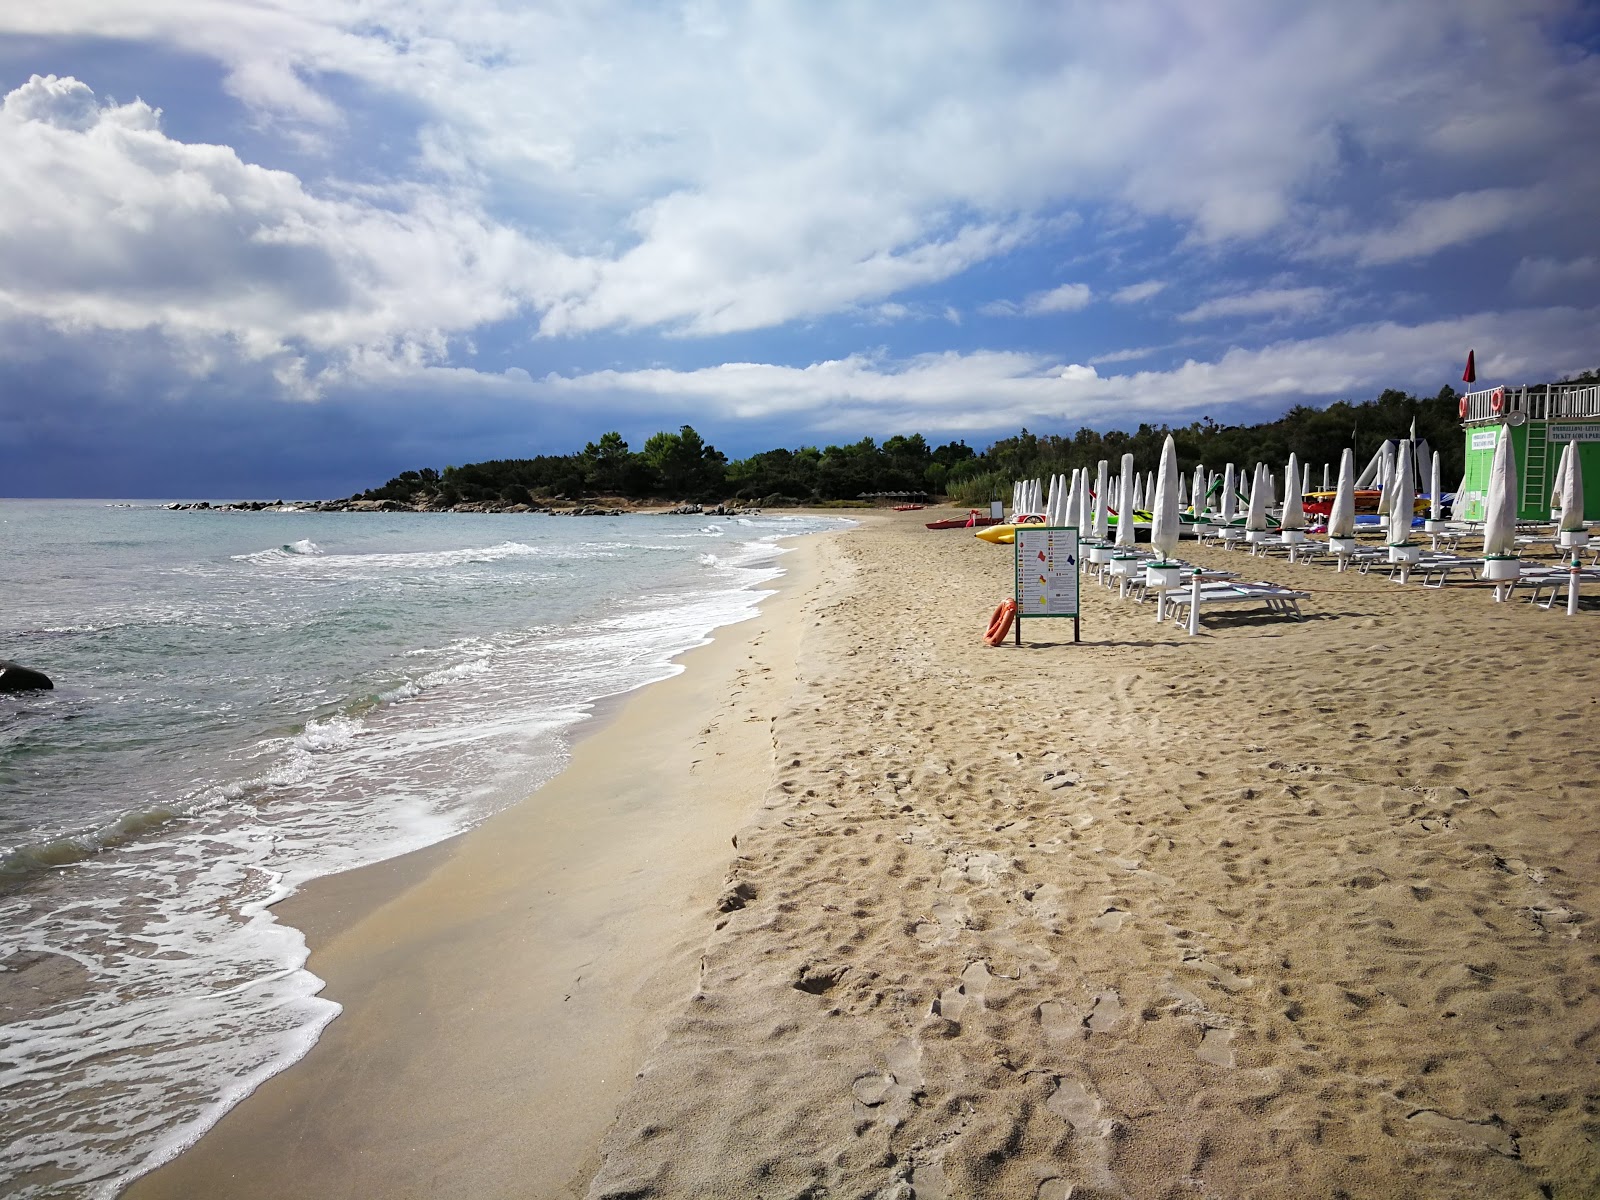 Photo of Spiaggia del Lido di Orri - recommended for family travellers with kids